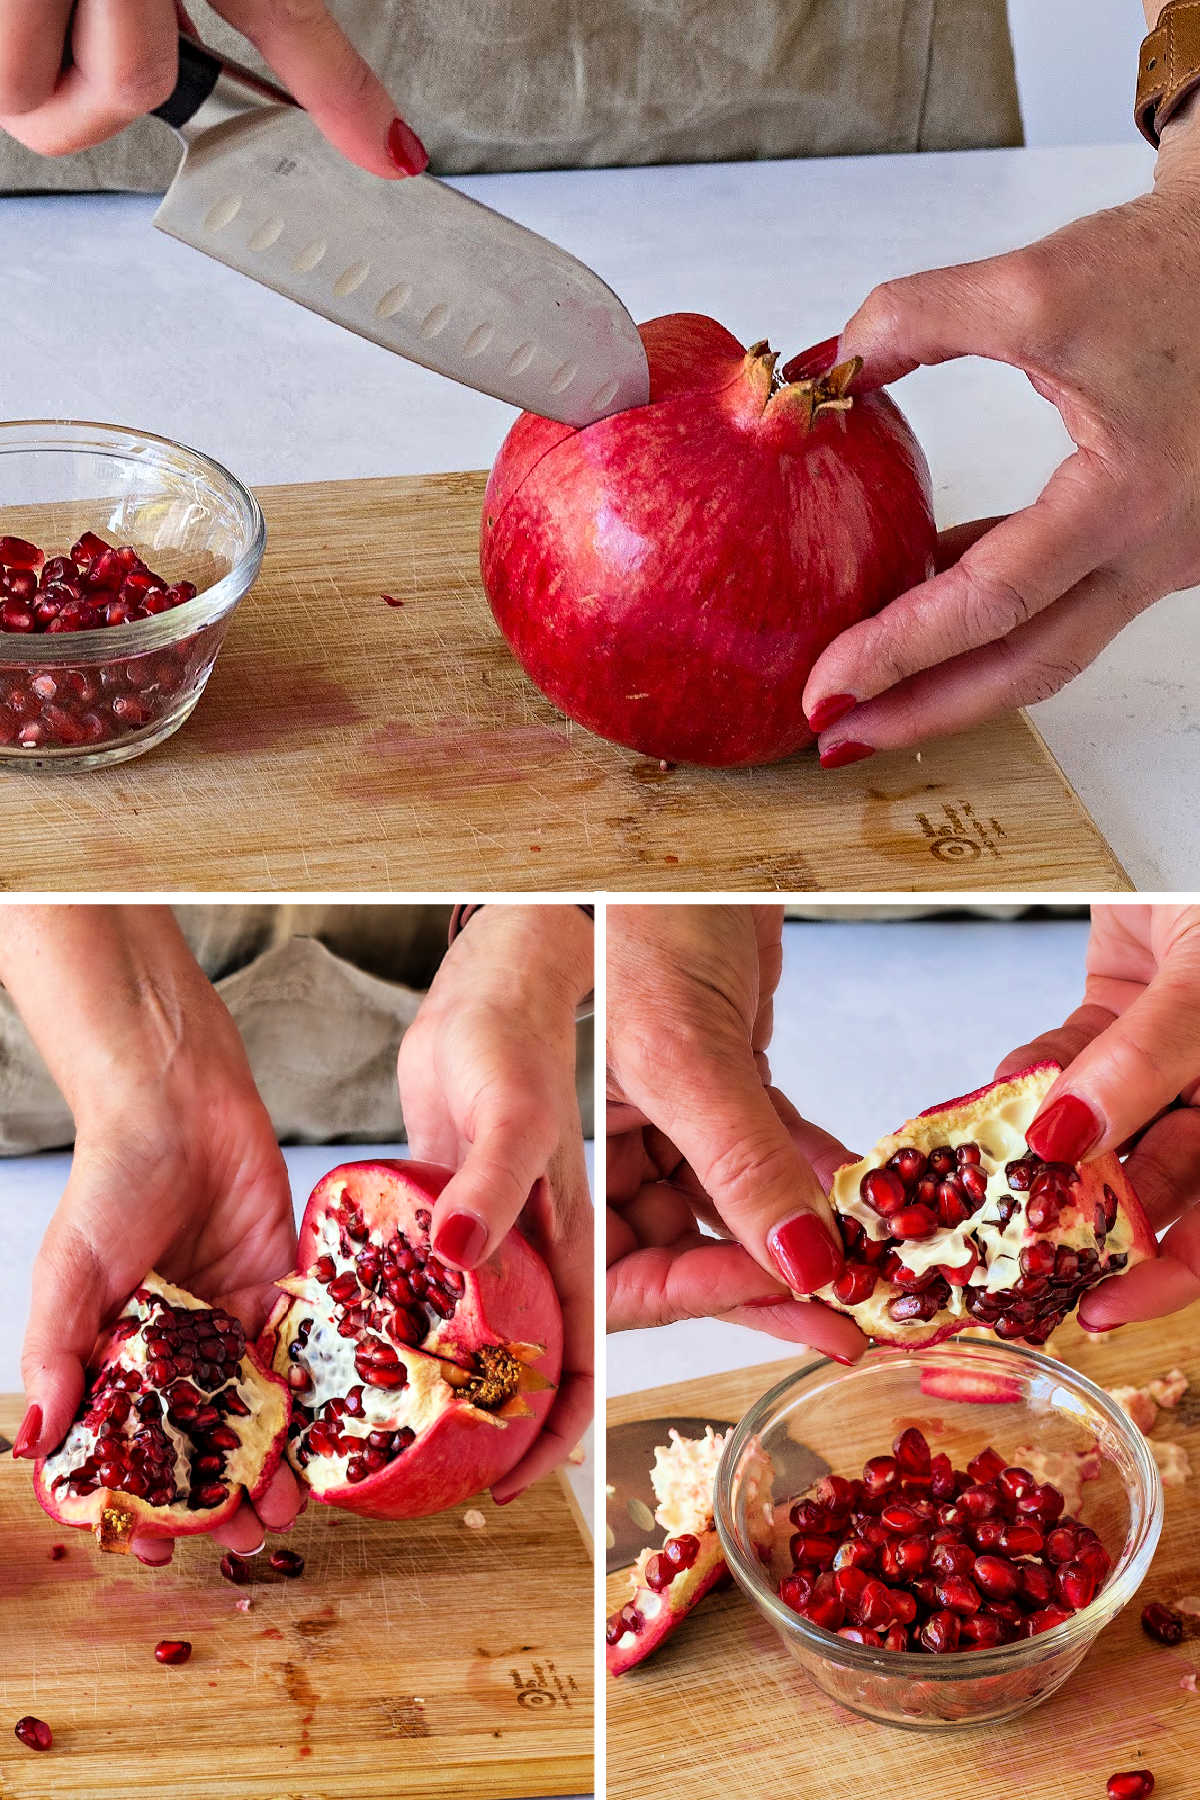 a process collage for removing the arils from a pomegranate: slicing the pomegranate; pulling a wedge away from the fruit; using fingers to loosen the arils.